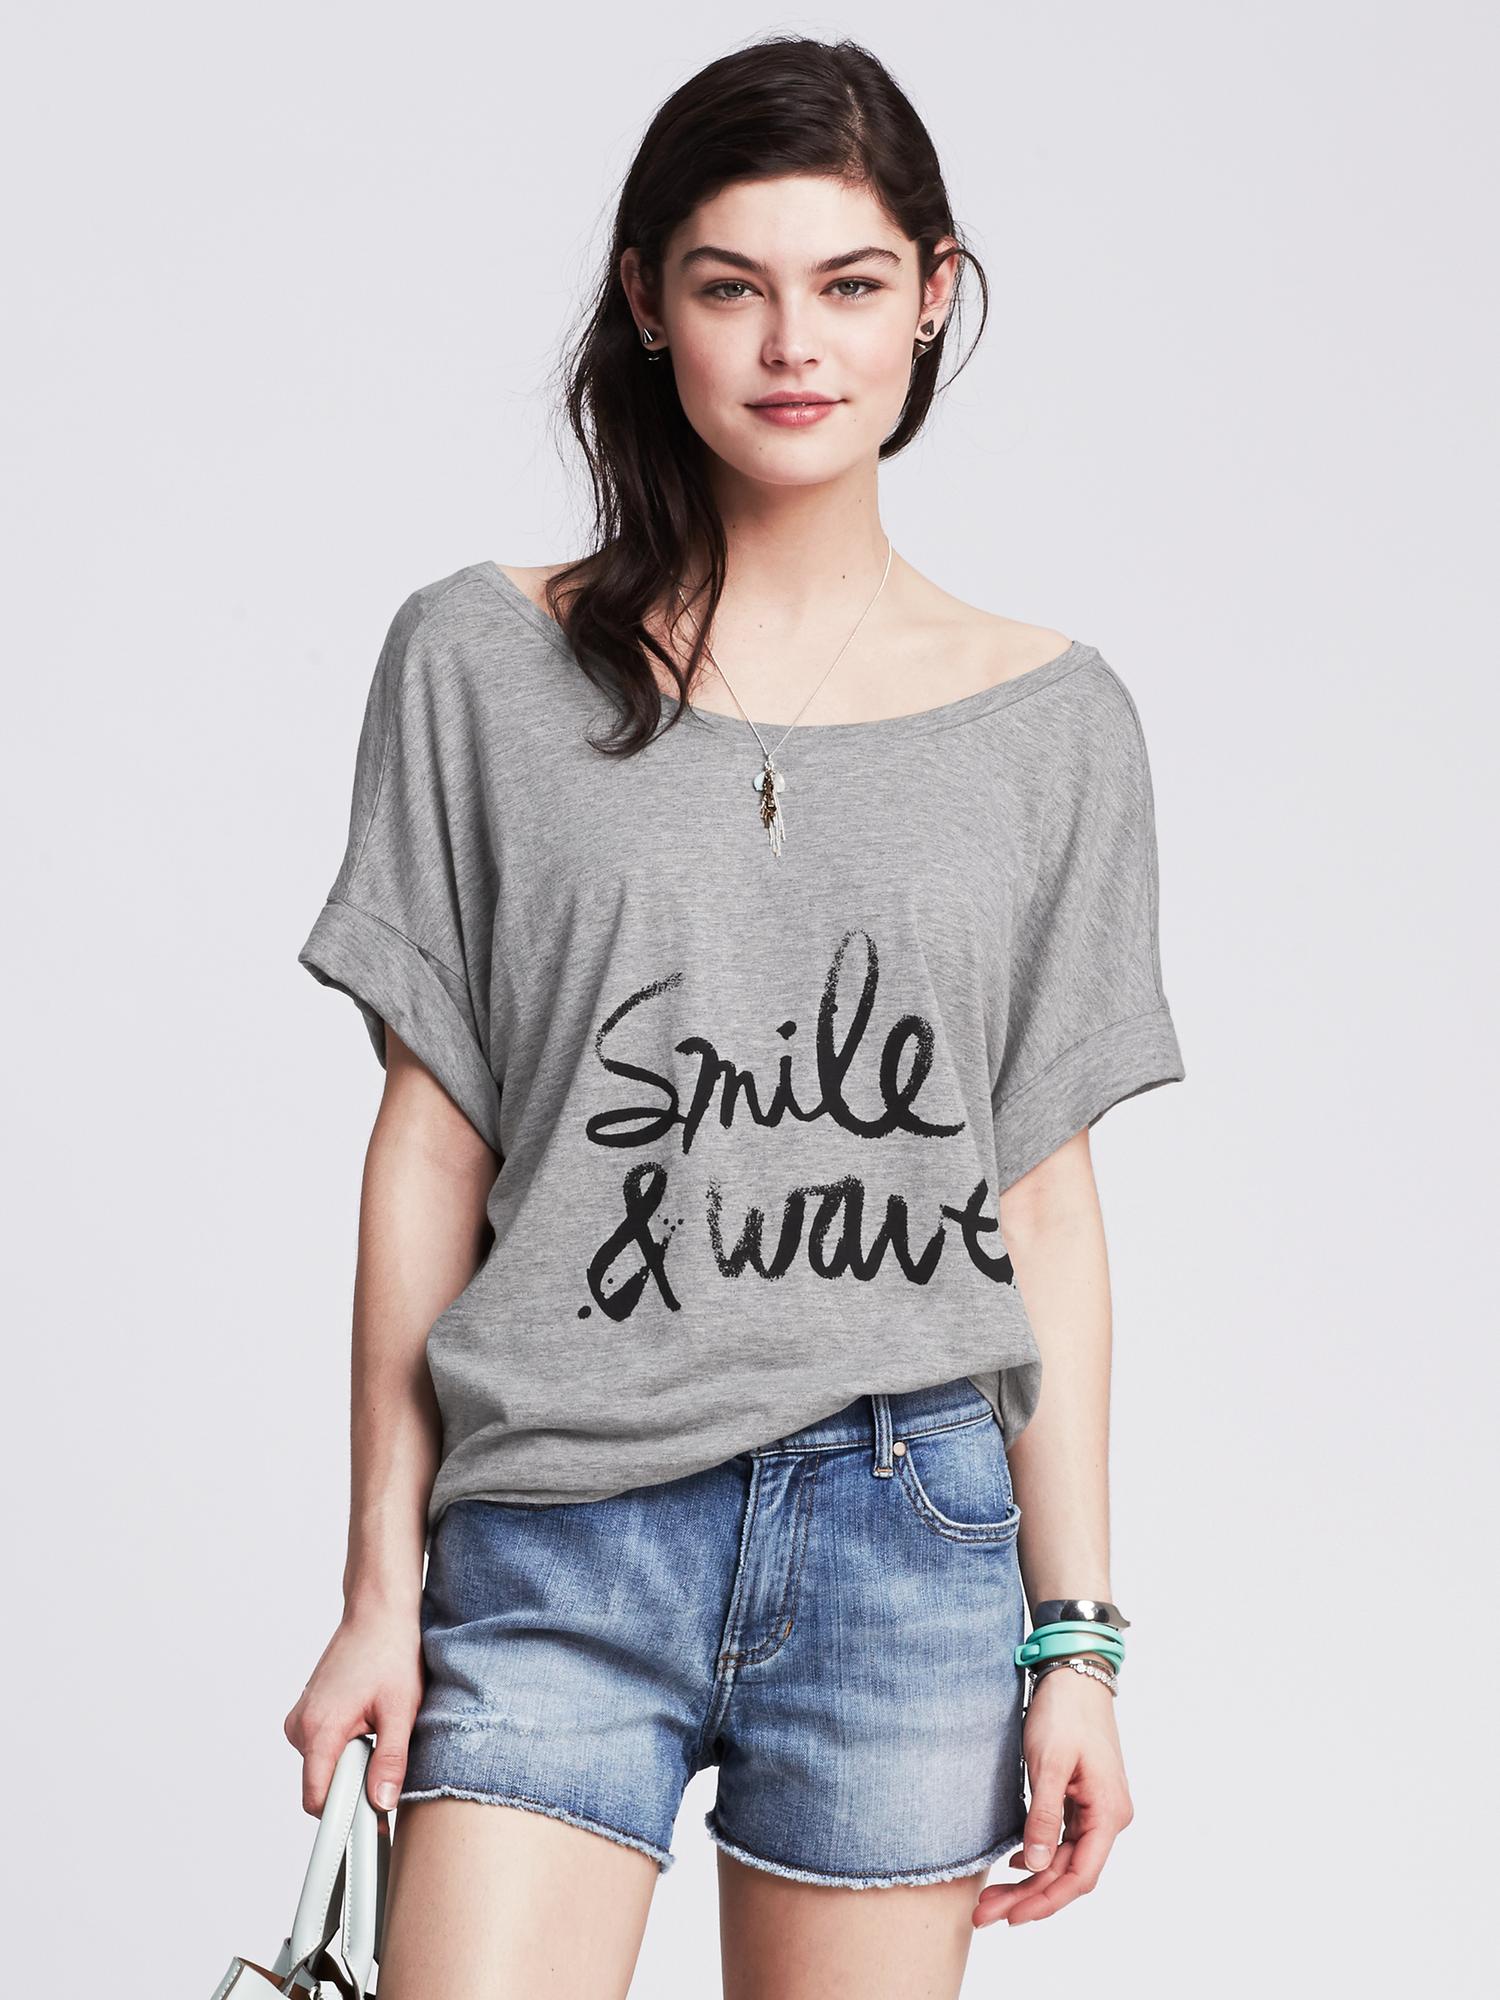 "Smile & Wave" Graphic Tee